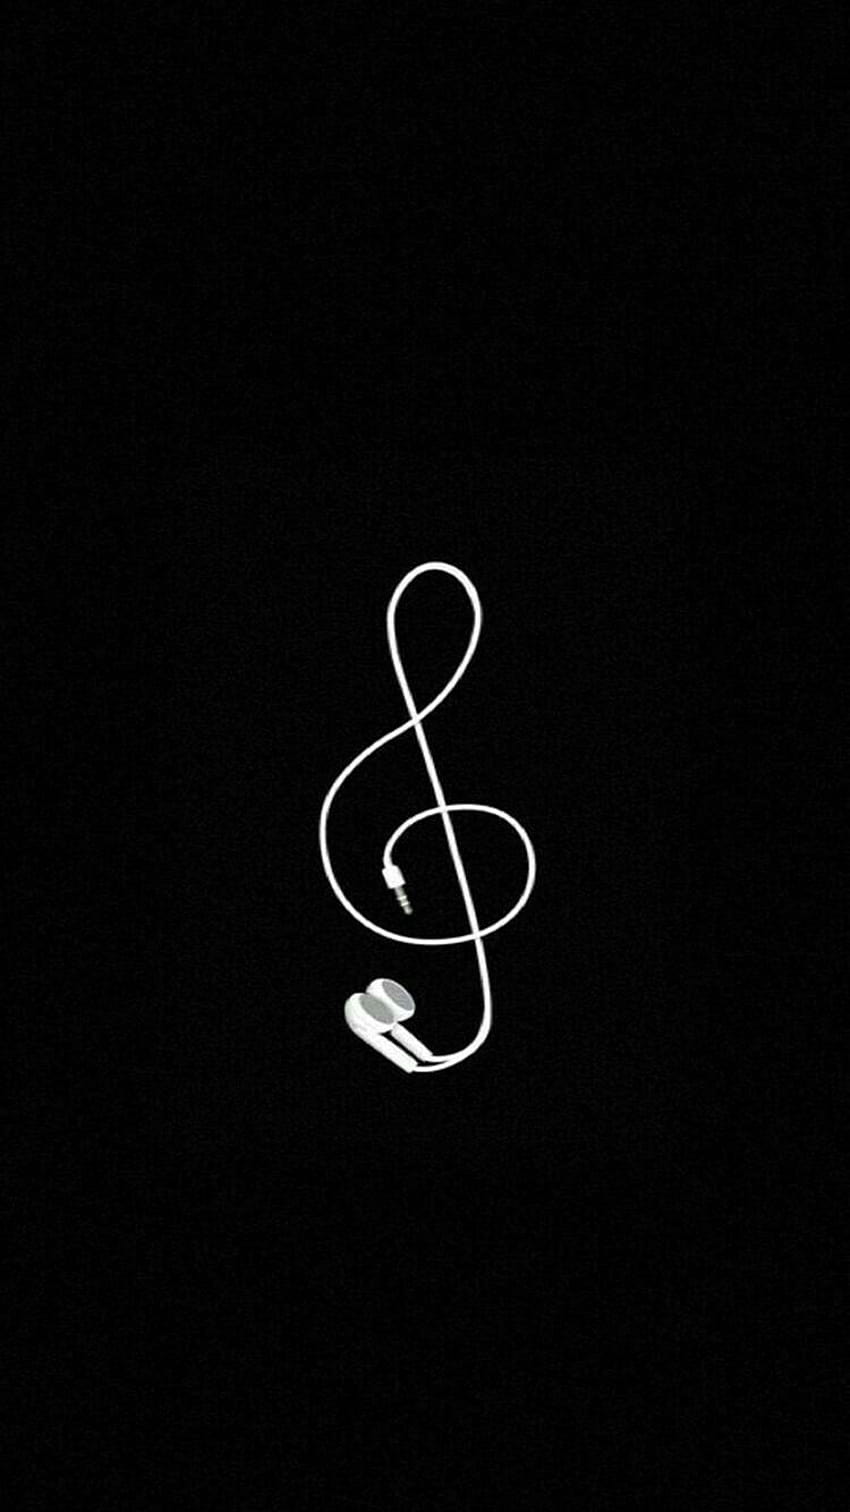 Simple Music treble clef earphones black and white iPhone, Android, g clif HD phone wallpaper